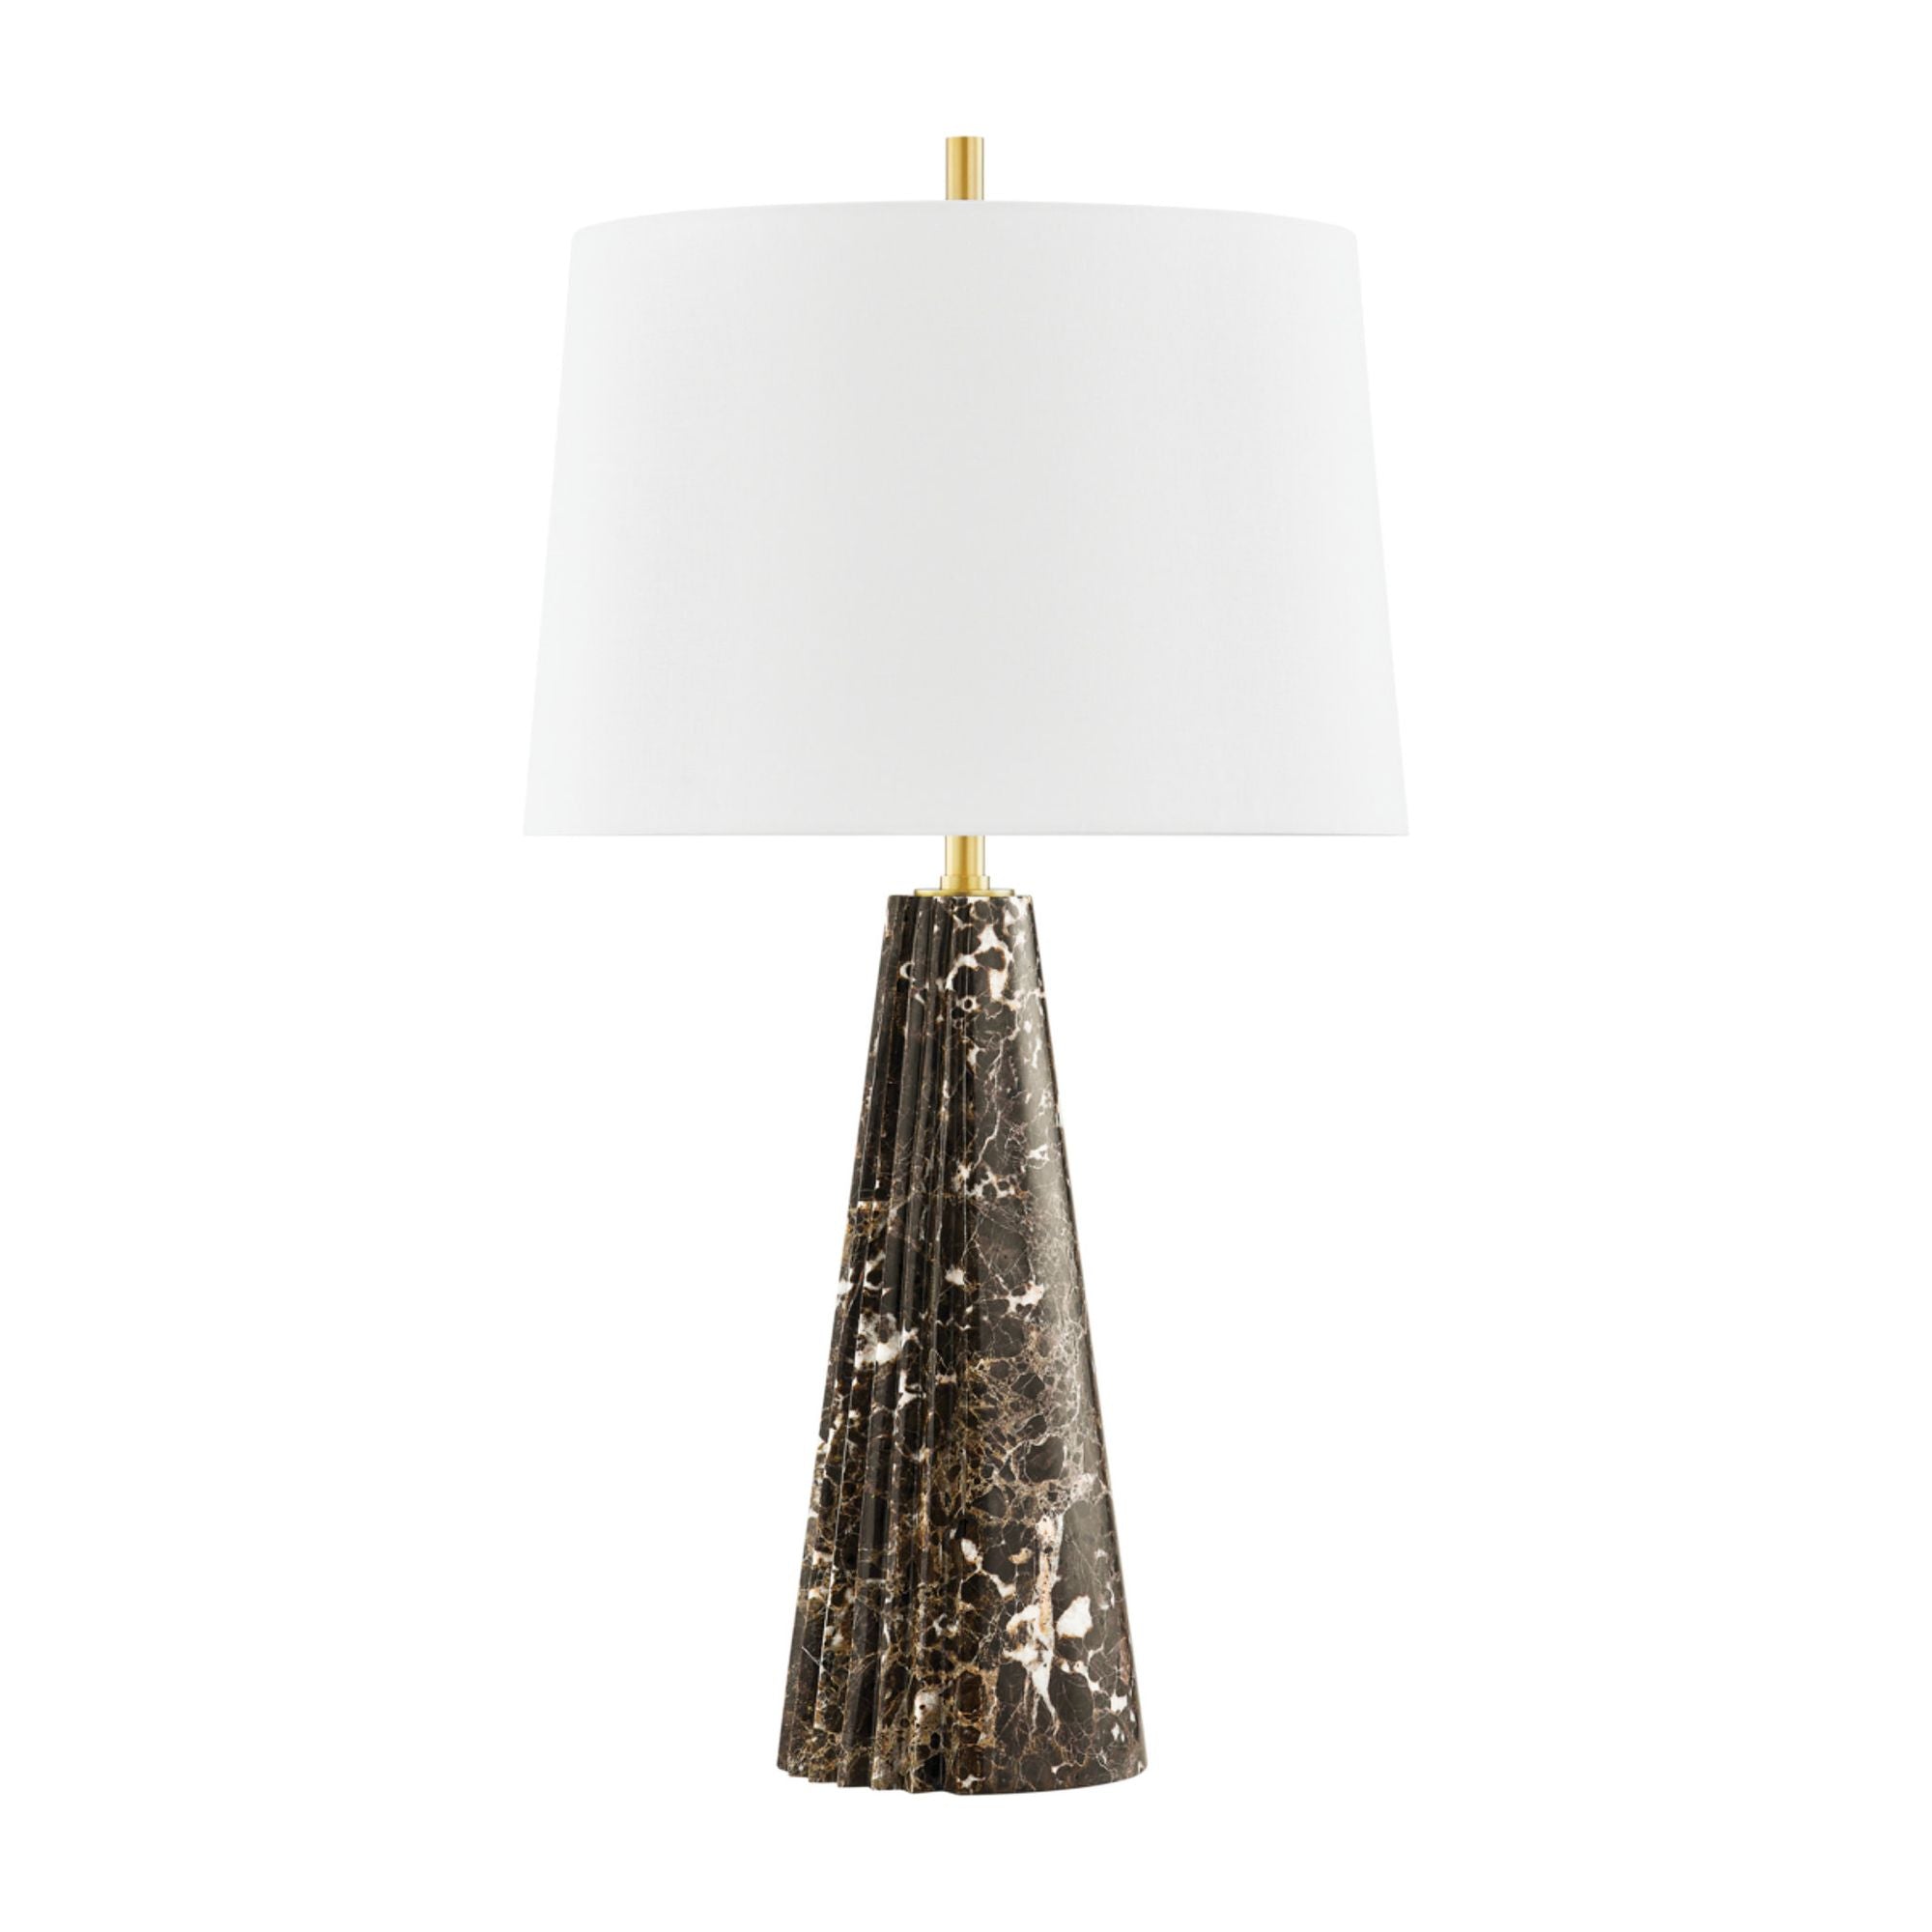 Fanny 1 Light Table Lamp in Aged Brass